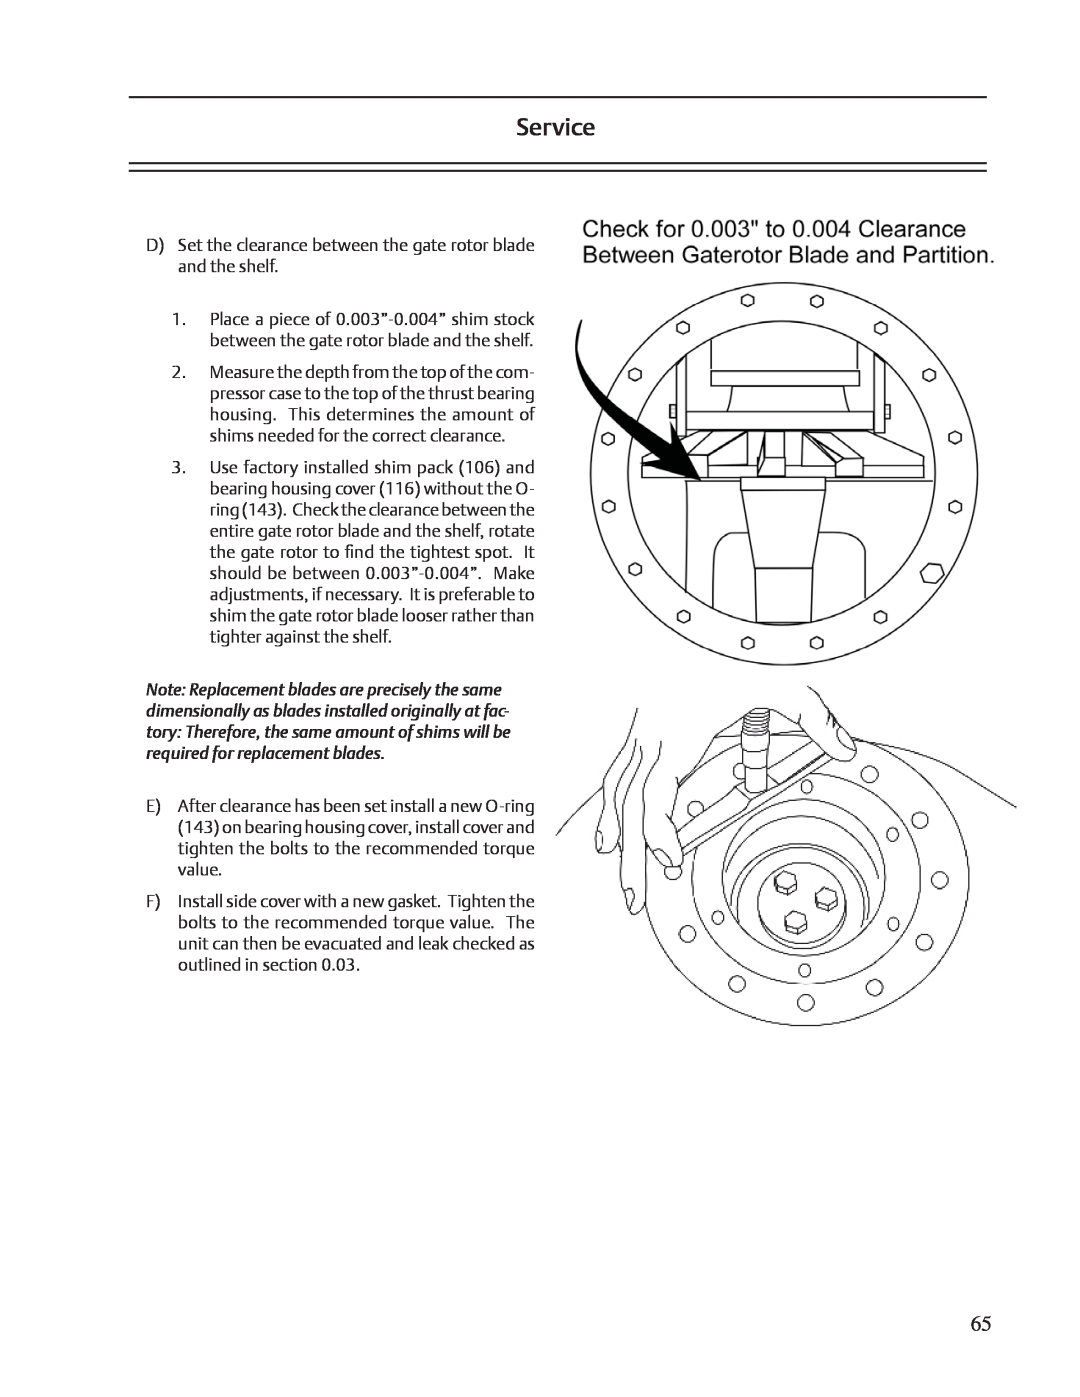 Emerson VSS, VSR, VSM service manual Service, D Set the clearance between the gate rotor blade and the shelf 